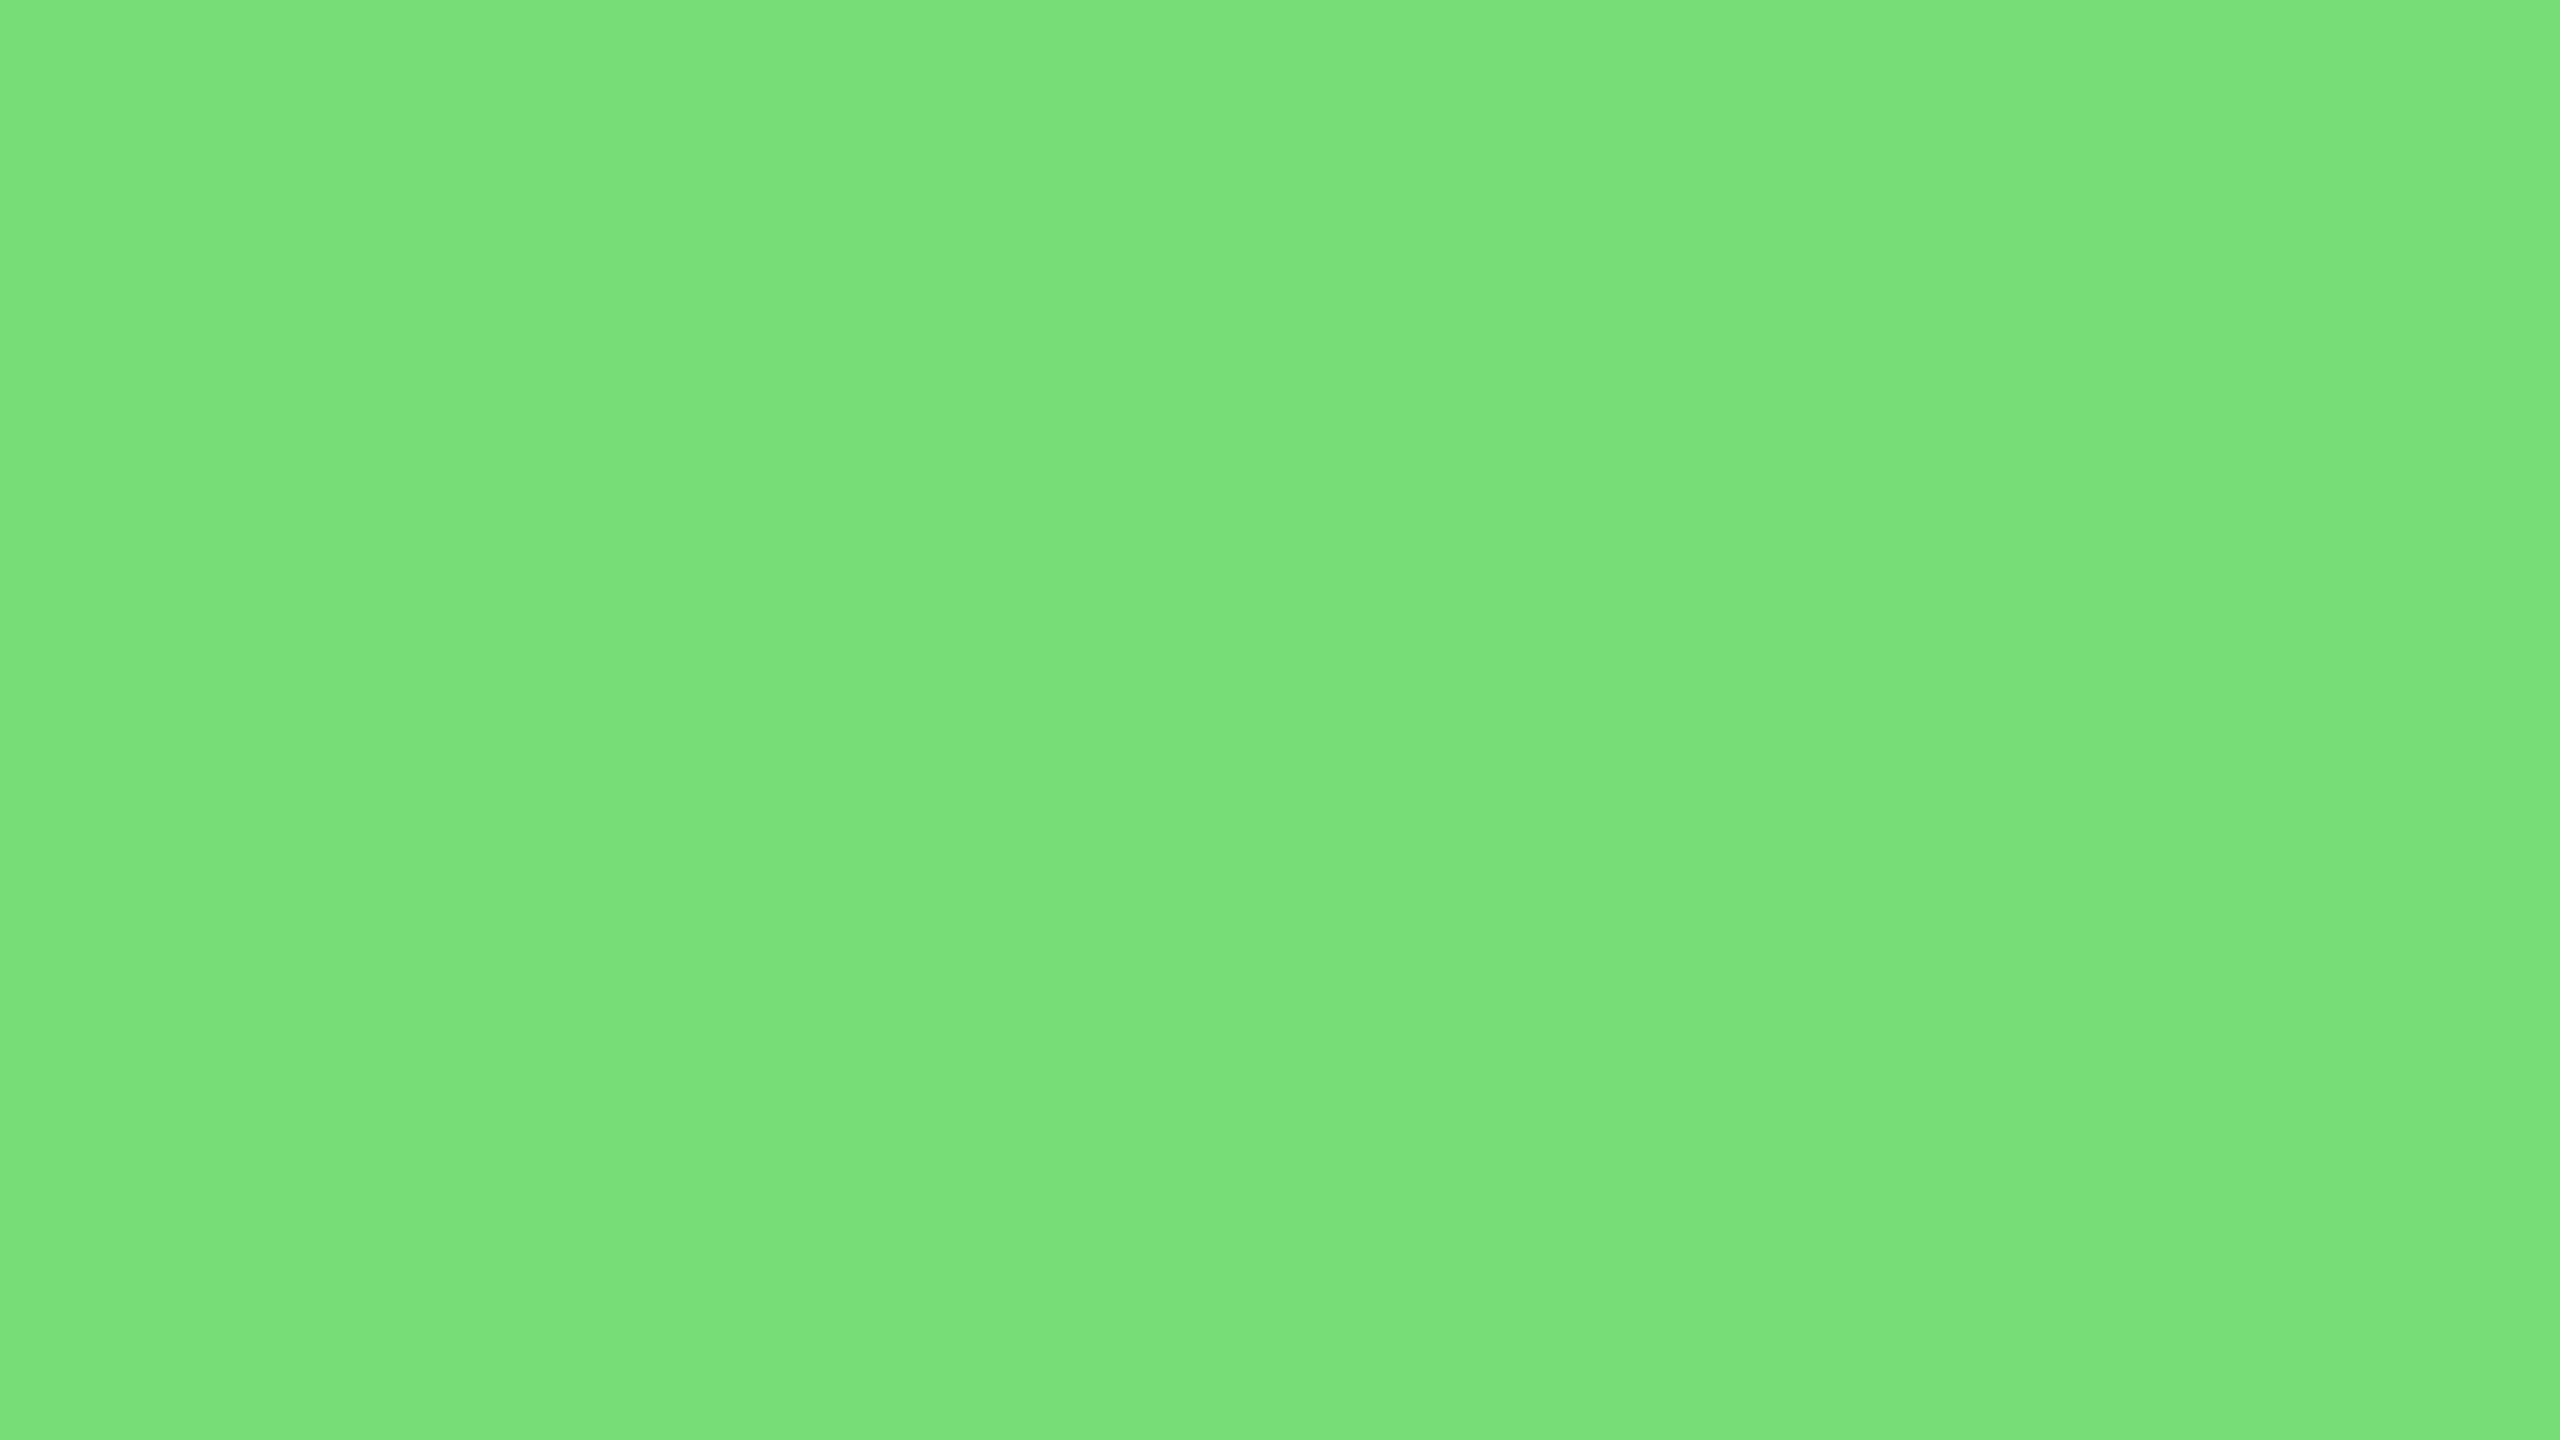 2560x1440 Pastel Green Solid Color Background